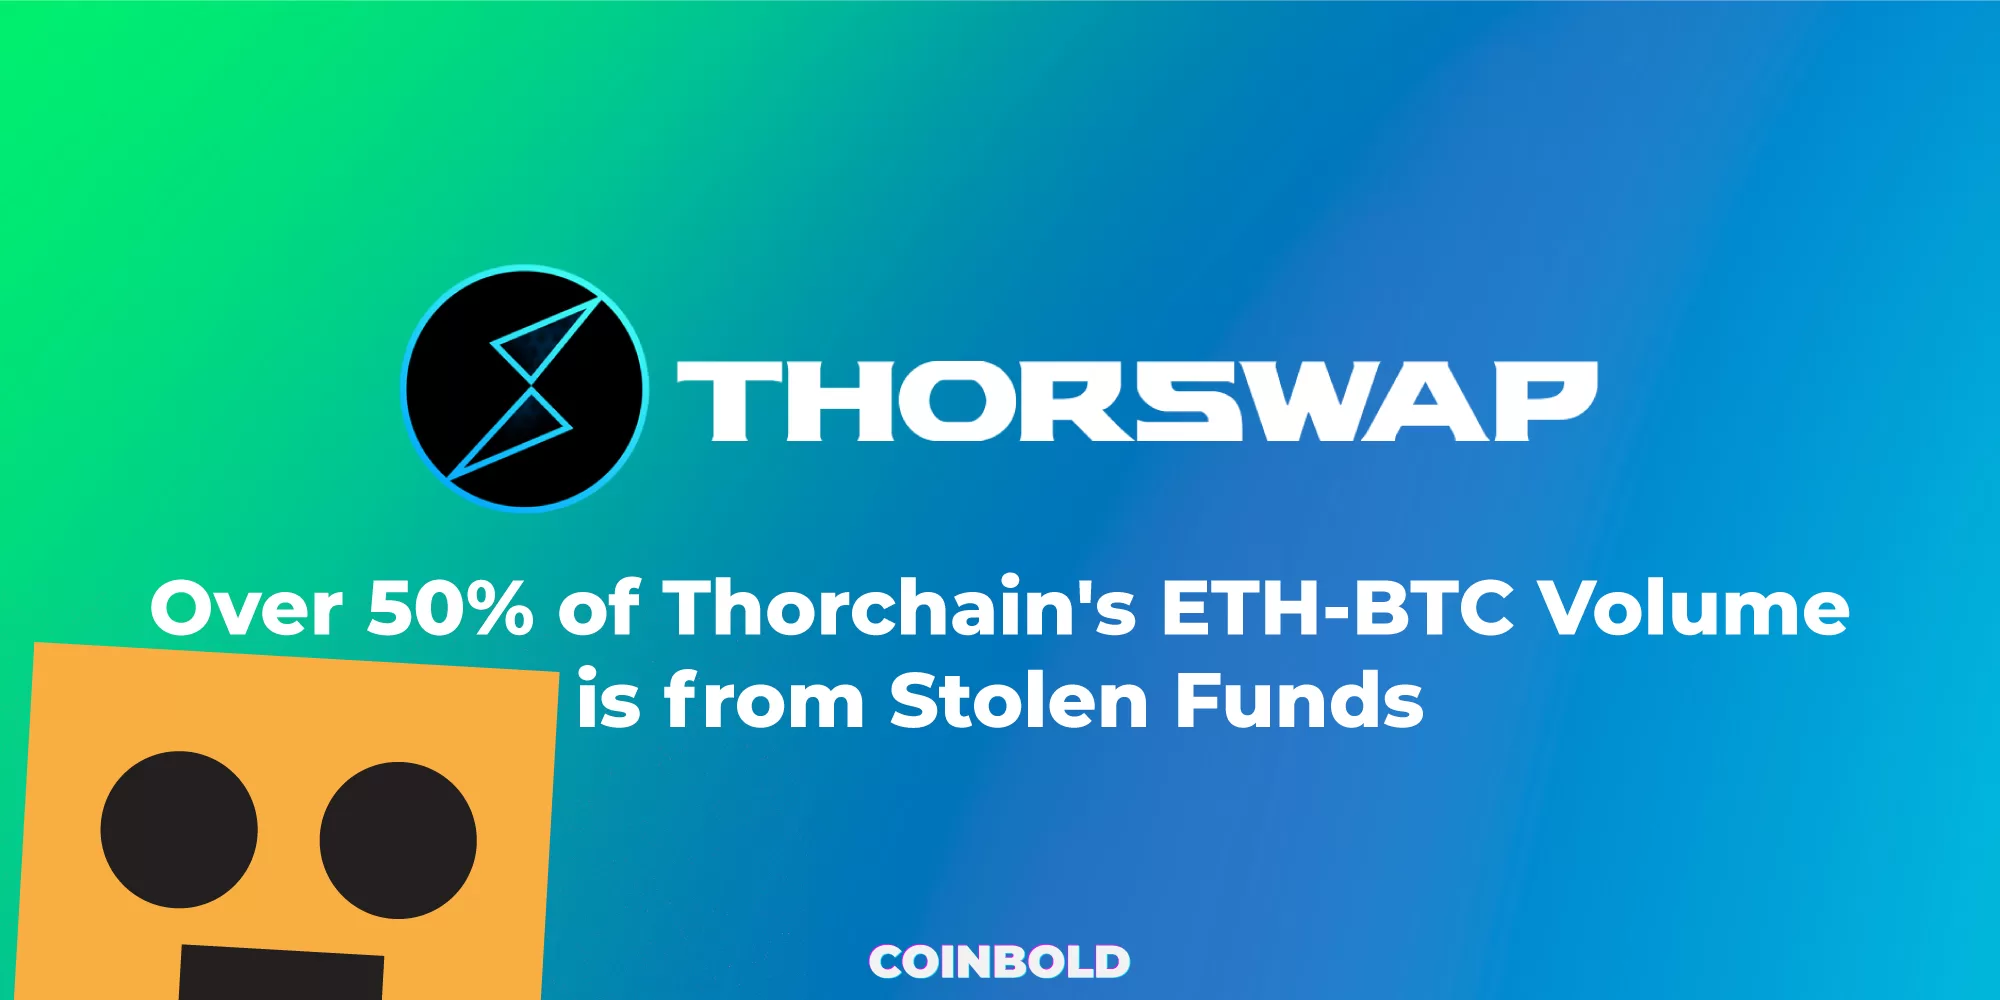 Over 50% of Thorchain's ETH BTC Volume is from Stolen Funds